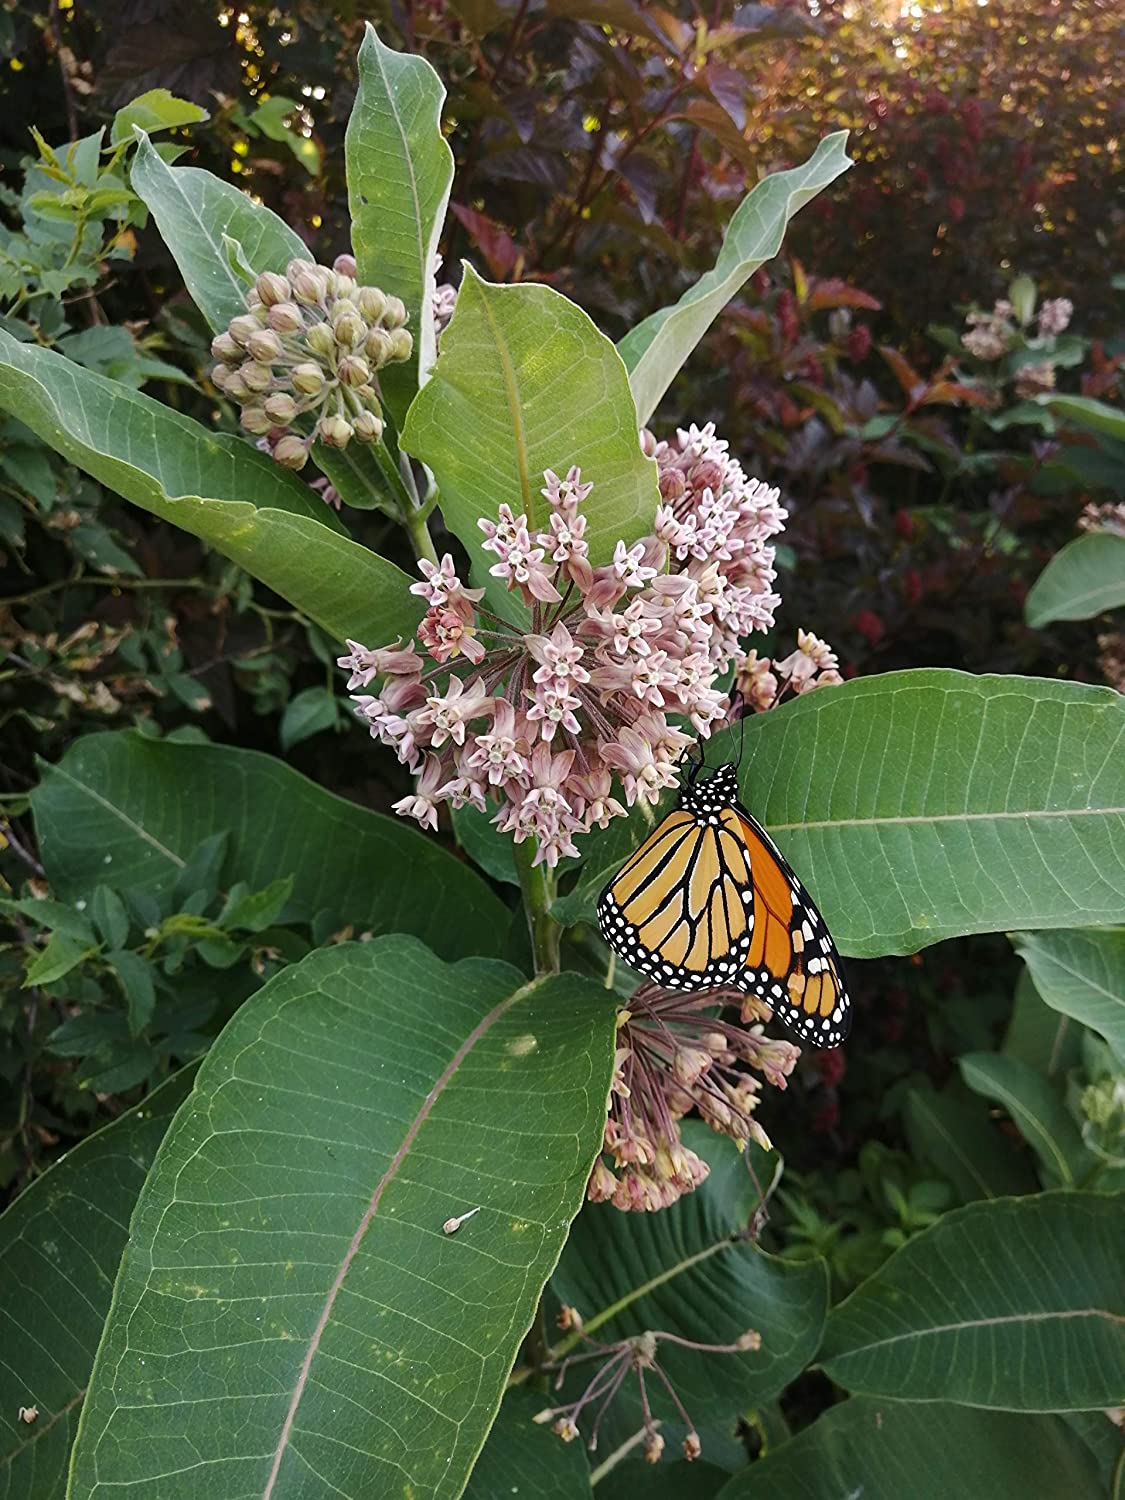 Hundredfold Common Milkweed Native Wild Flower 30 Seeds - Asclepias syriaca Milk Weed, Food Source for Monarch Caterpillar and Butterfly